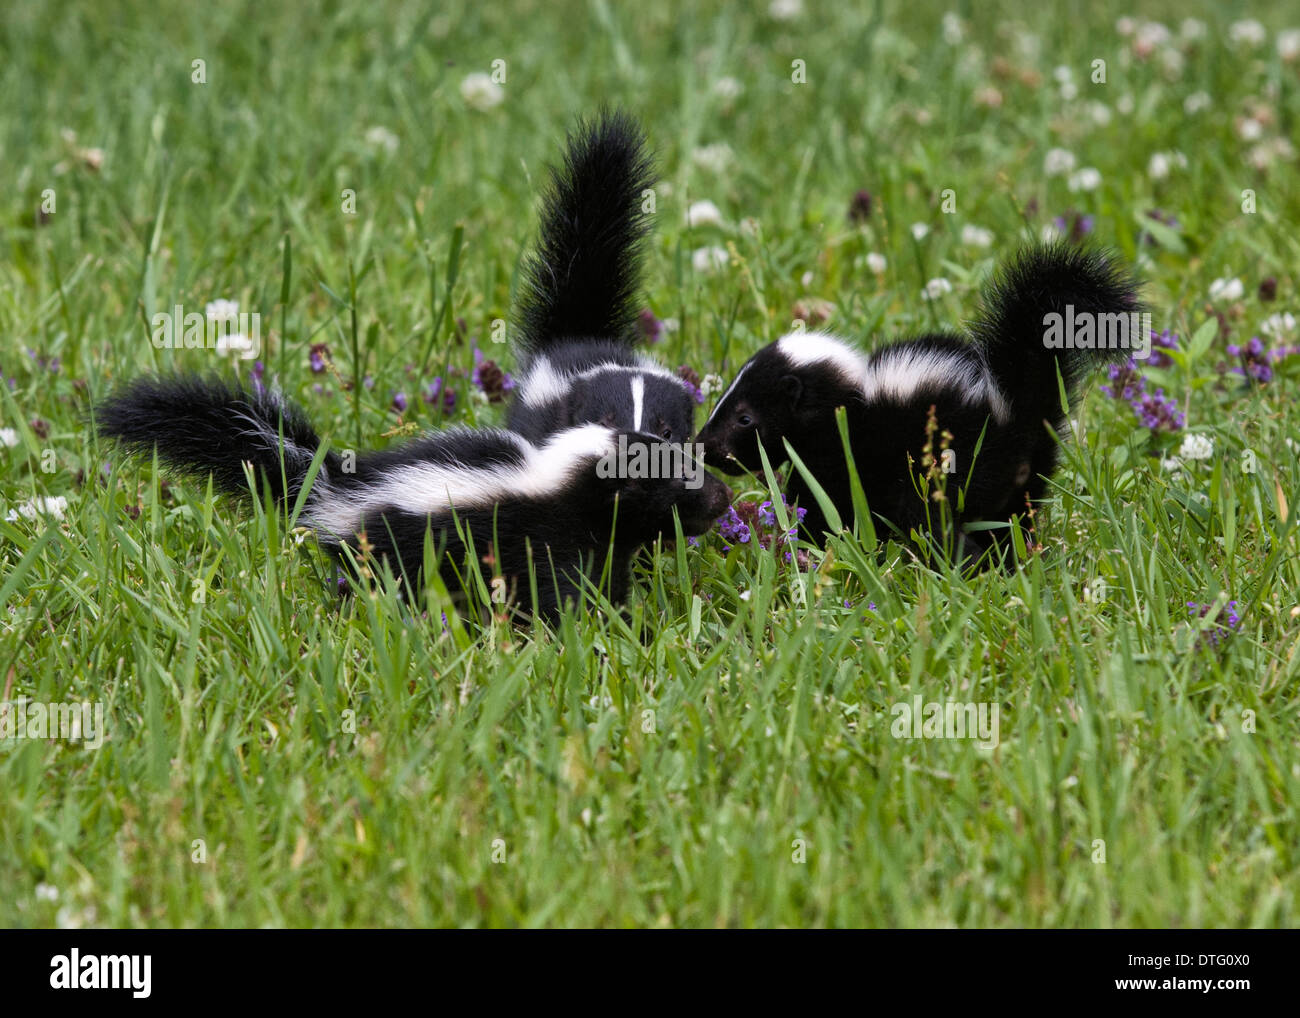 Three baby skunks with their heads together in a meadow Stock Photo